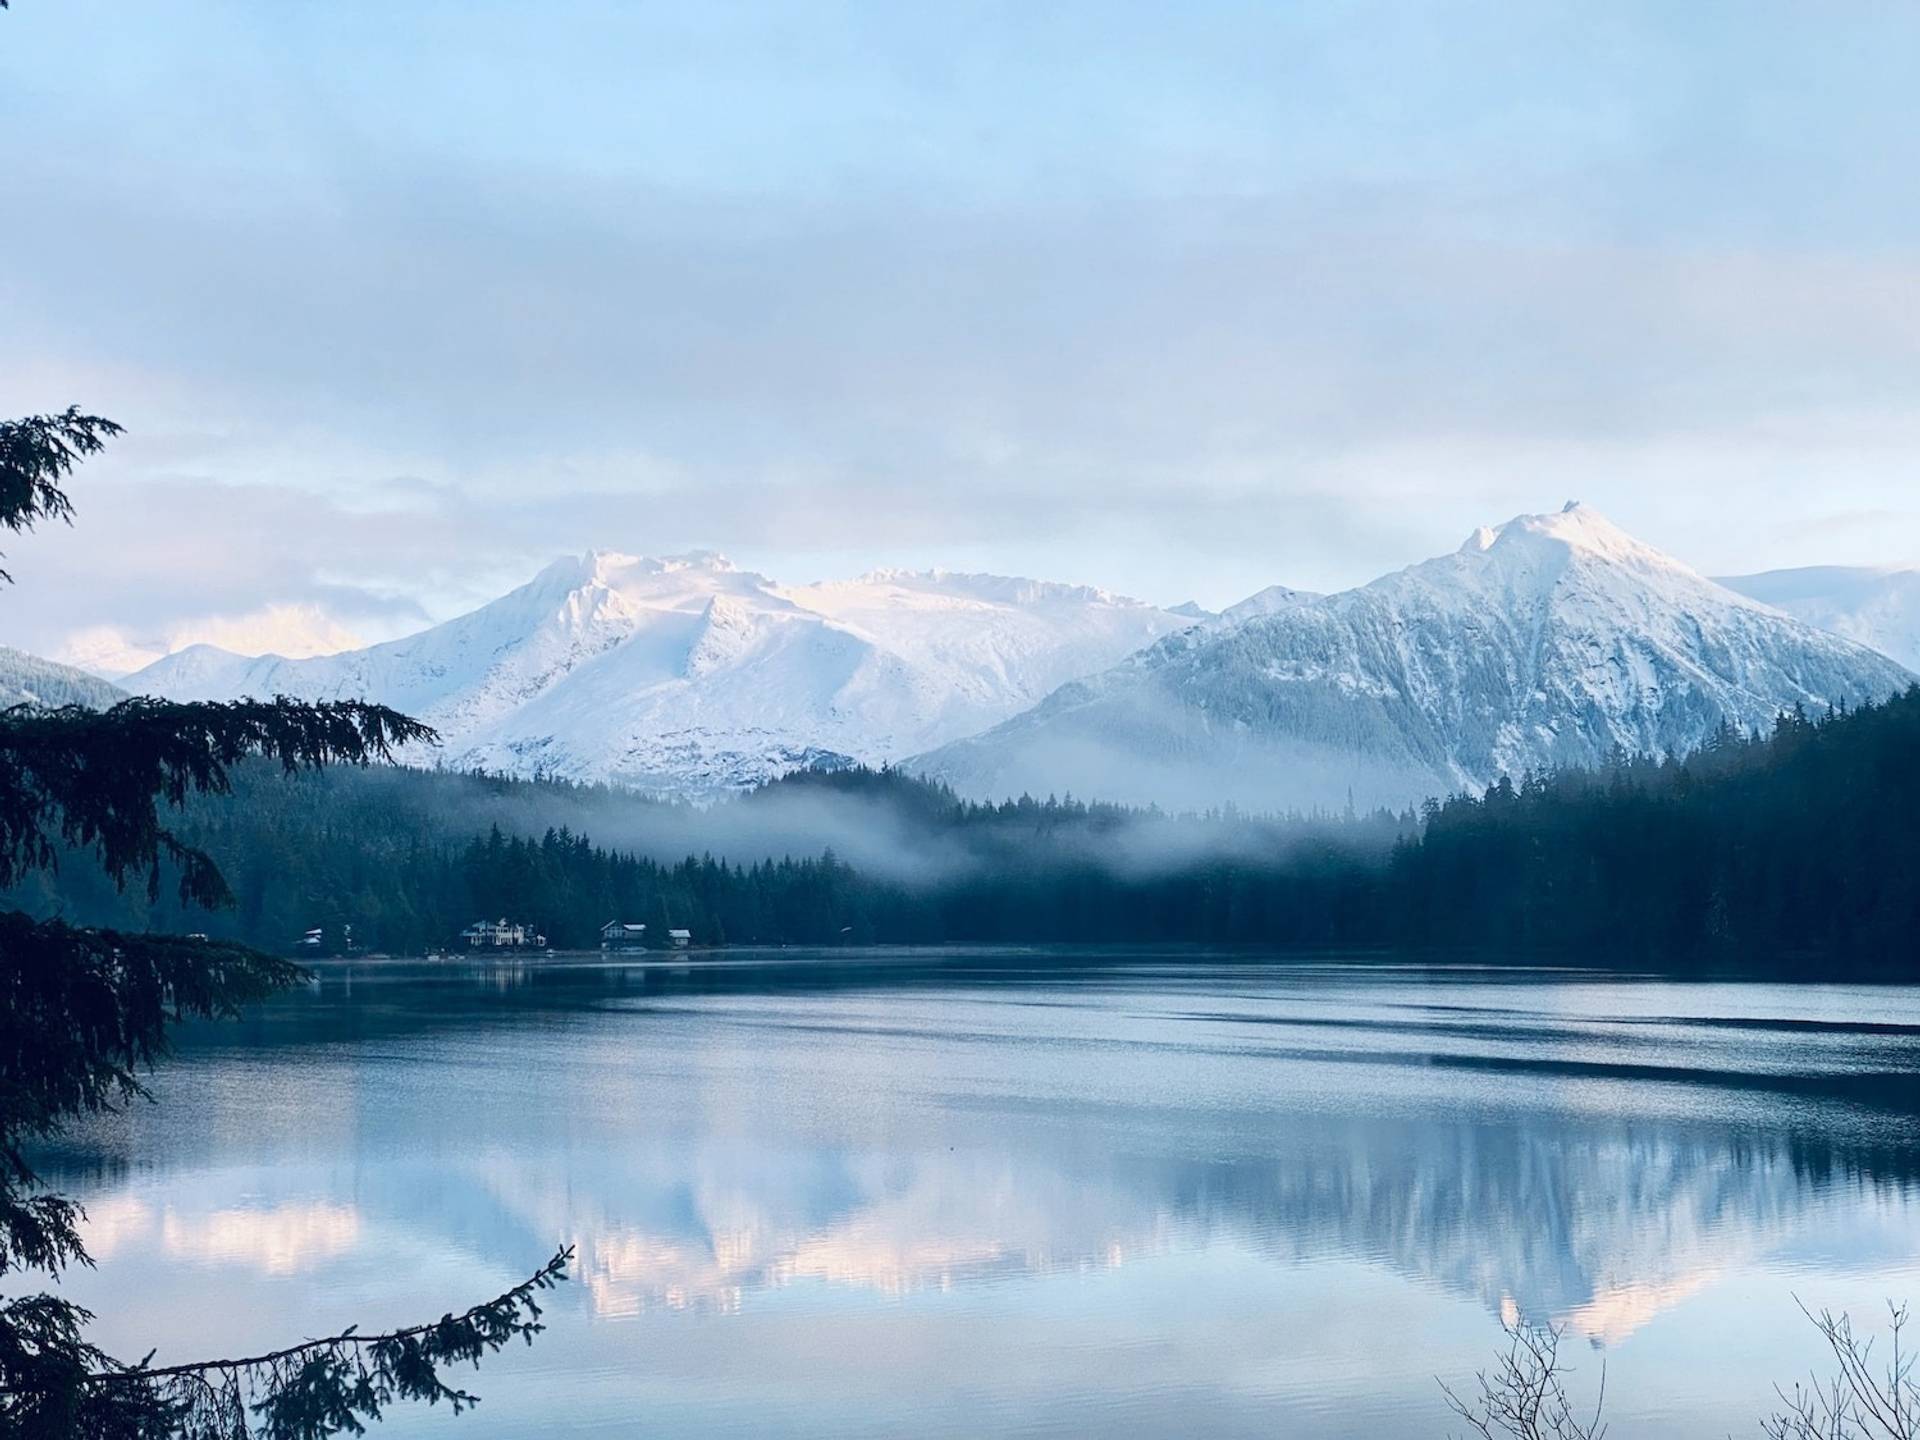 Snowy mountains and glassy lake to represent where to buy e-bikes in Alaska